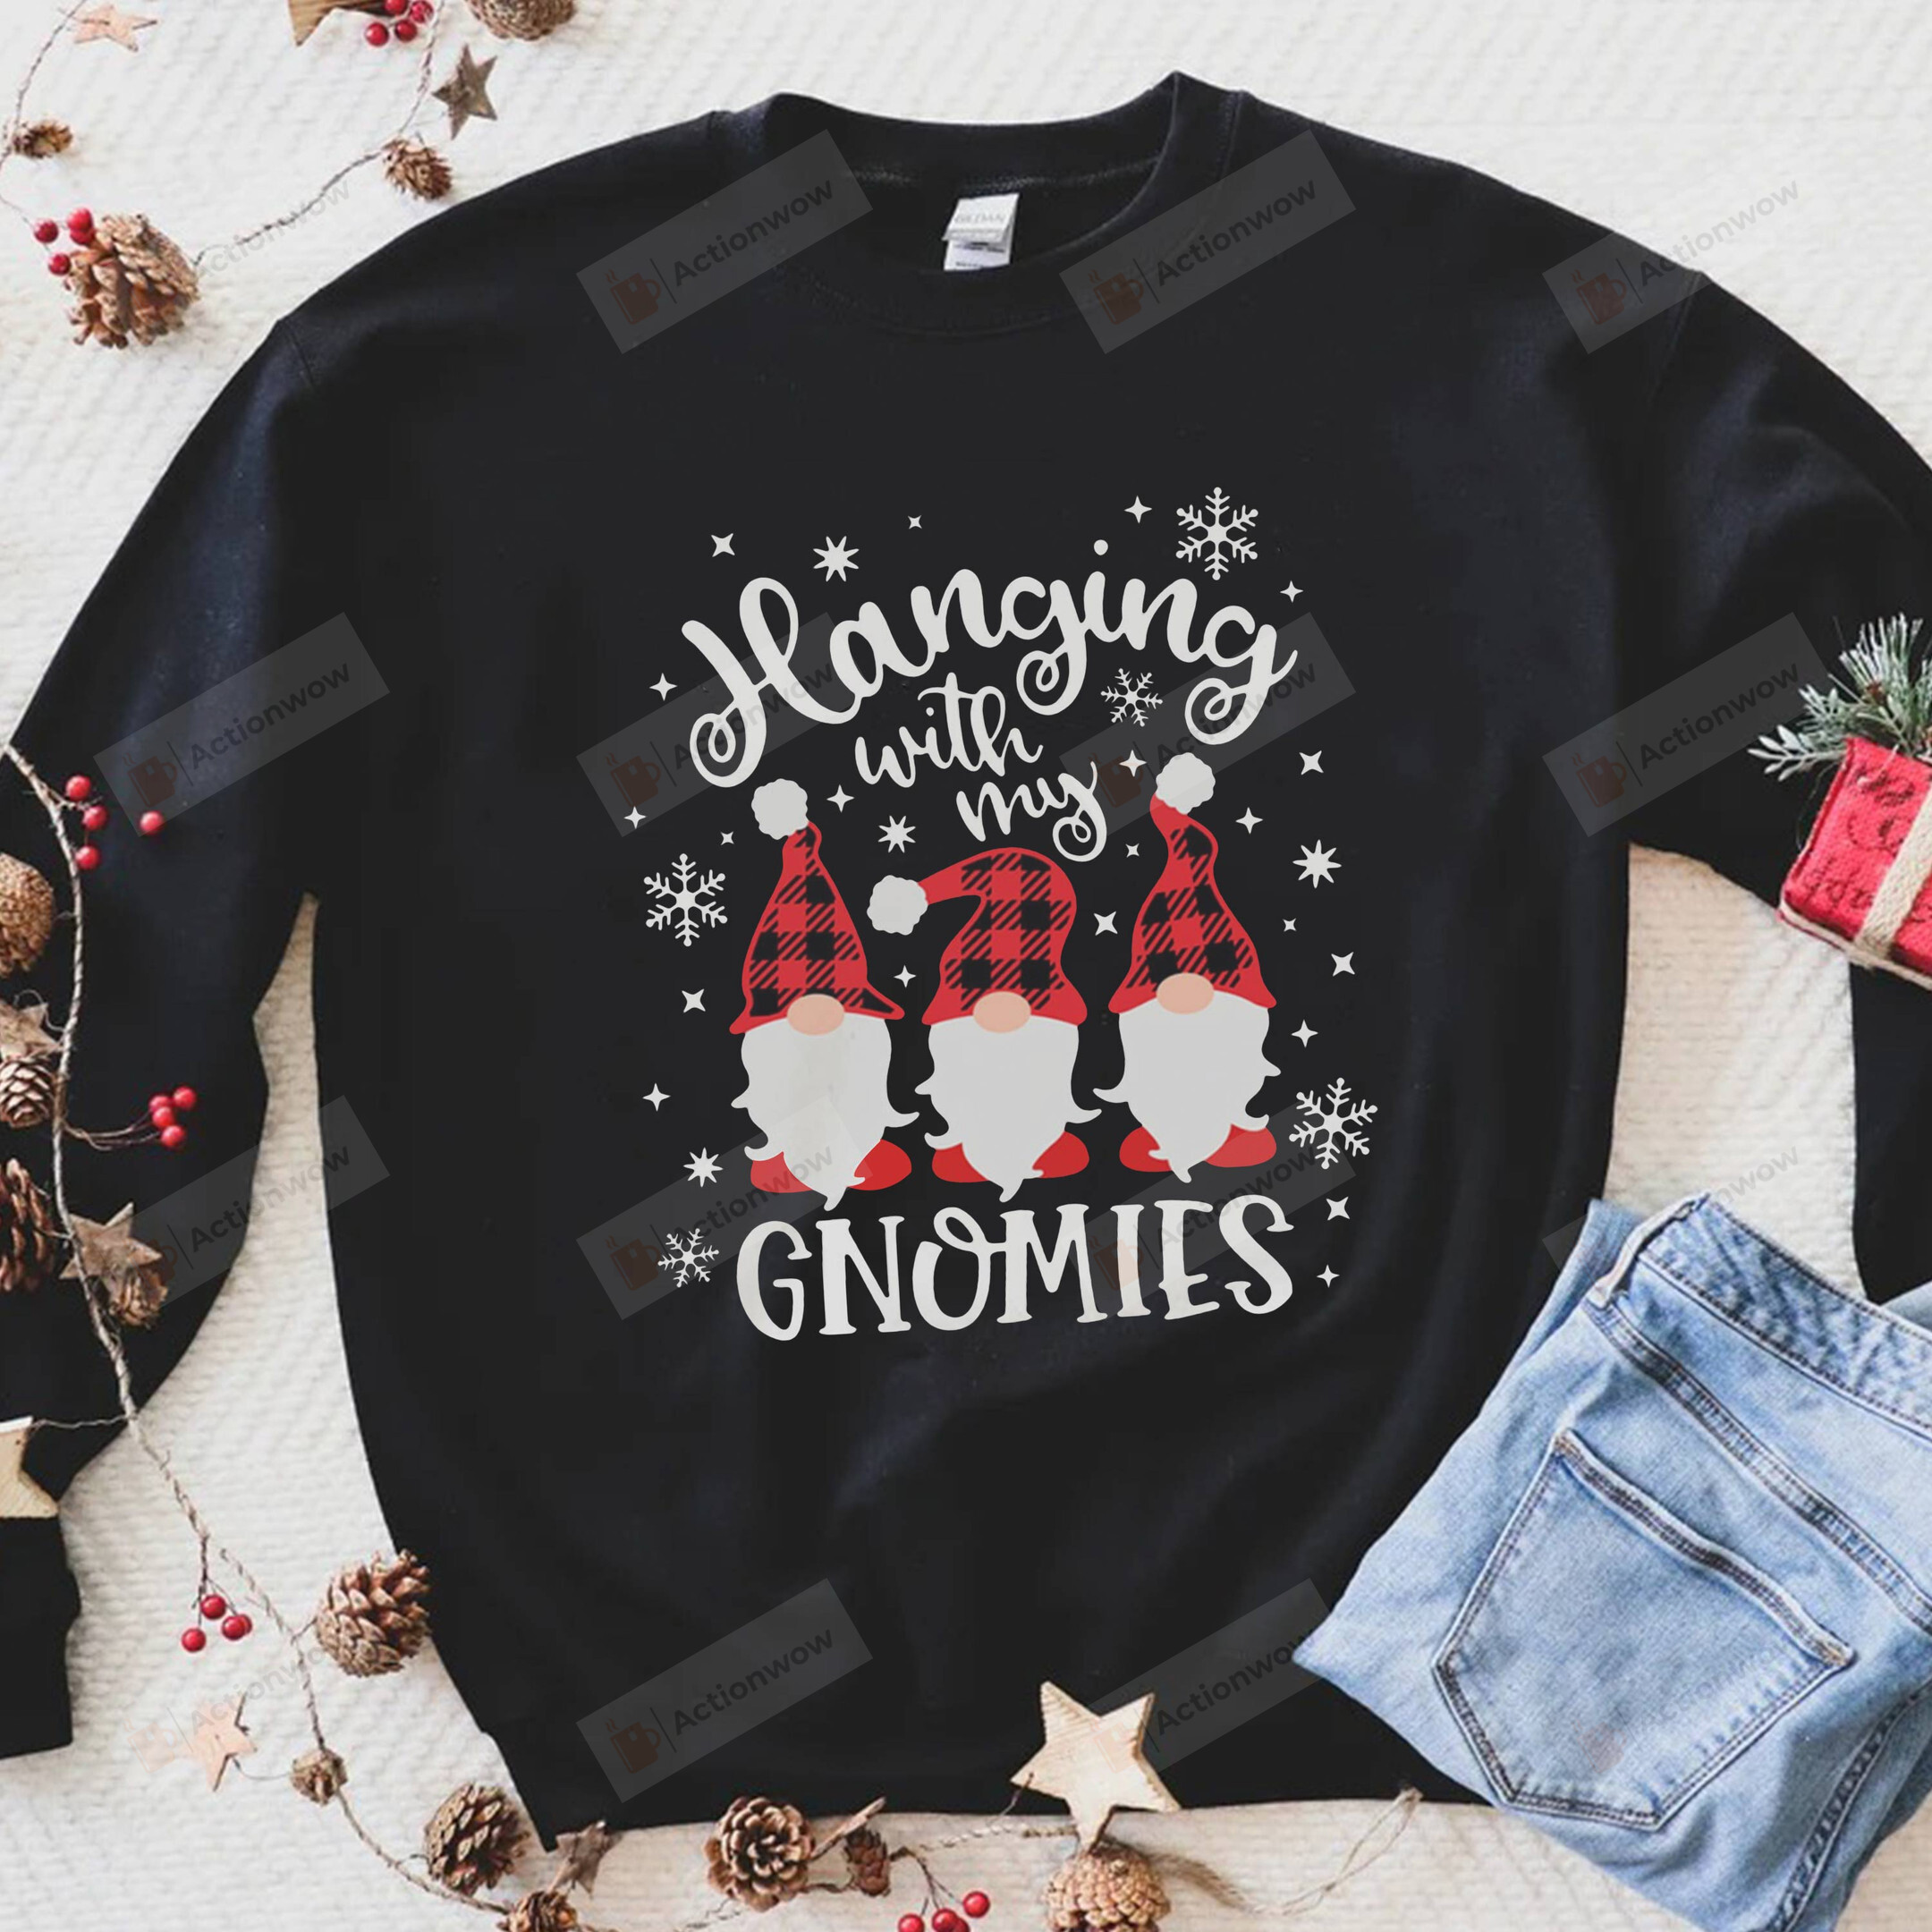 Hanging With My Gnomies Sweatshirt, Funny Gnomes Sweatshirt Gifts For Family Friend On Christmas